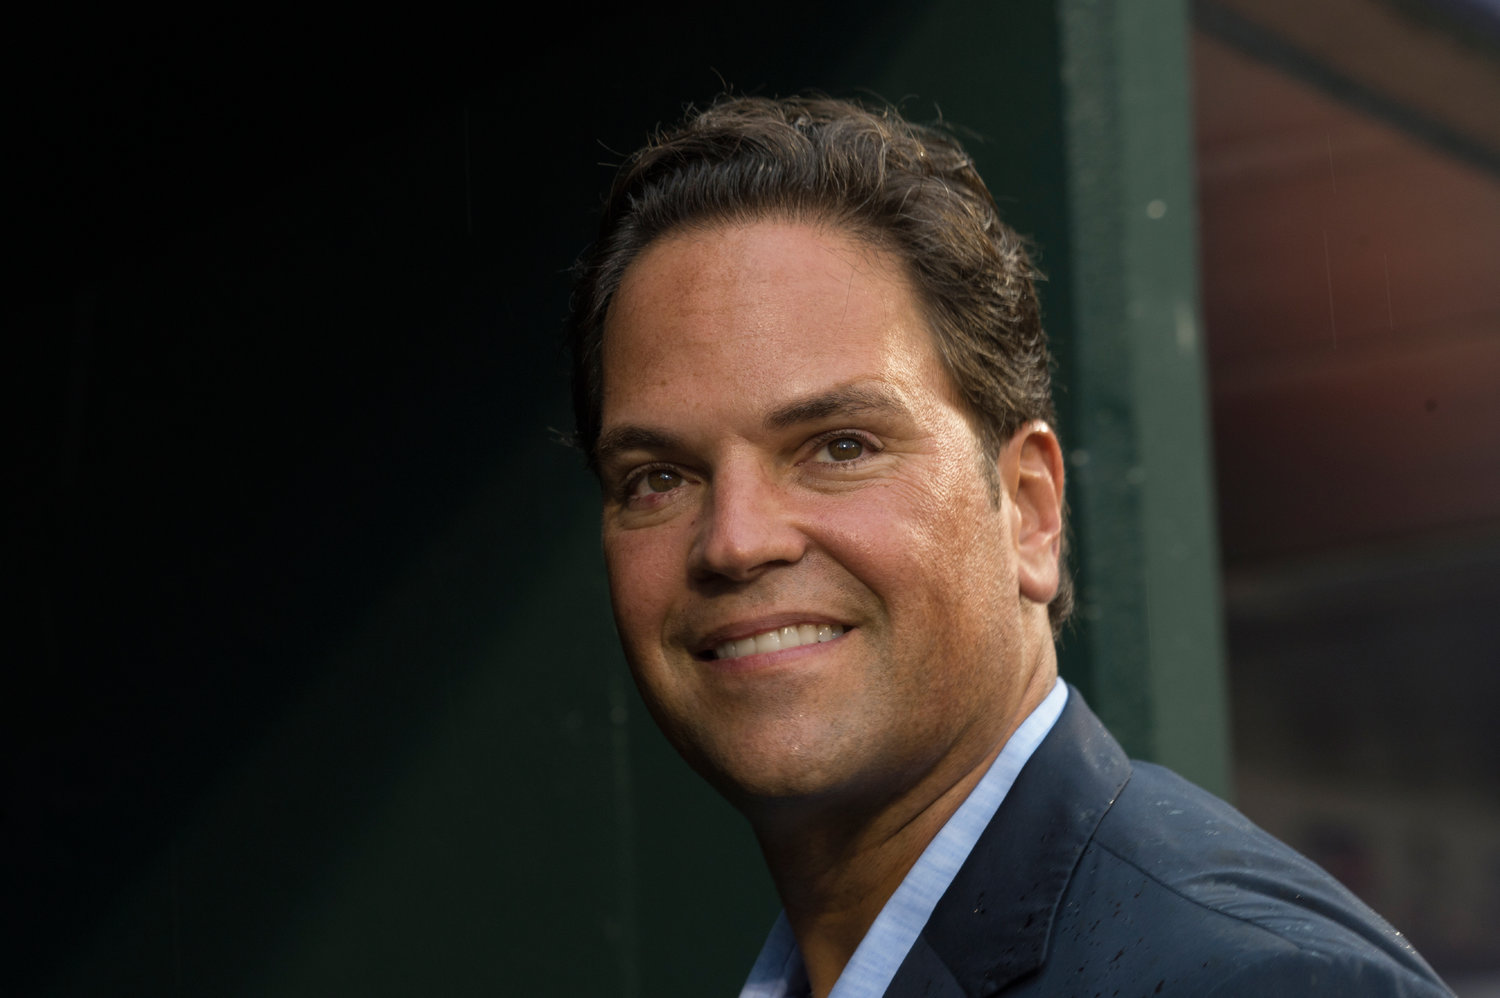 FAITH INSIGHTS—Mike Piazza, very familiar
to New Yorkers for his Hall of Fame career as a
catcher for the Mets, will speak about his Catholic
faith at ManUp New York Oct. 23 at St. Joseph’s
Seminary, Dunwoodie.